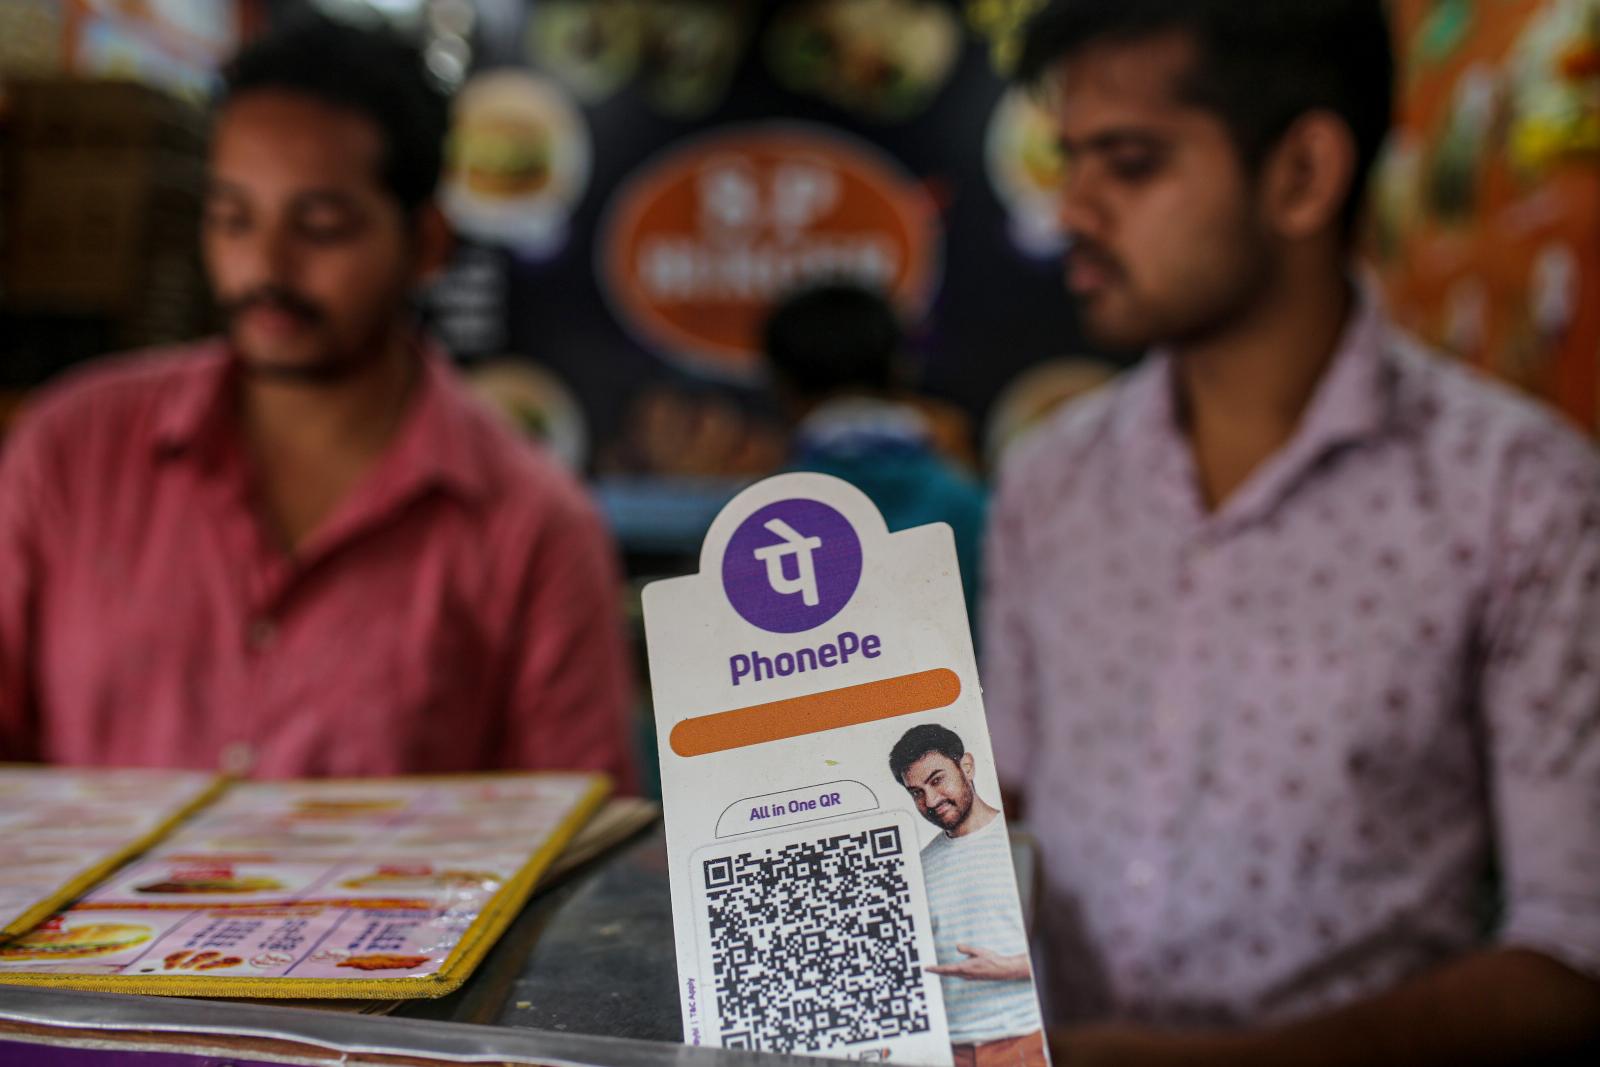 Walmart-backed payments giant PhonePe makes e-commerce push